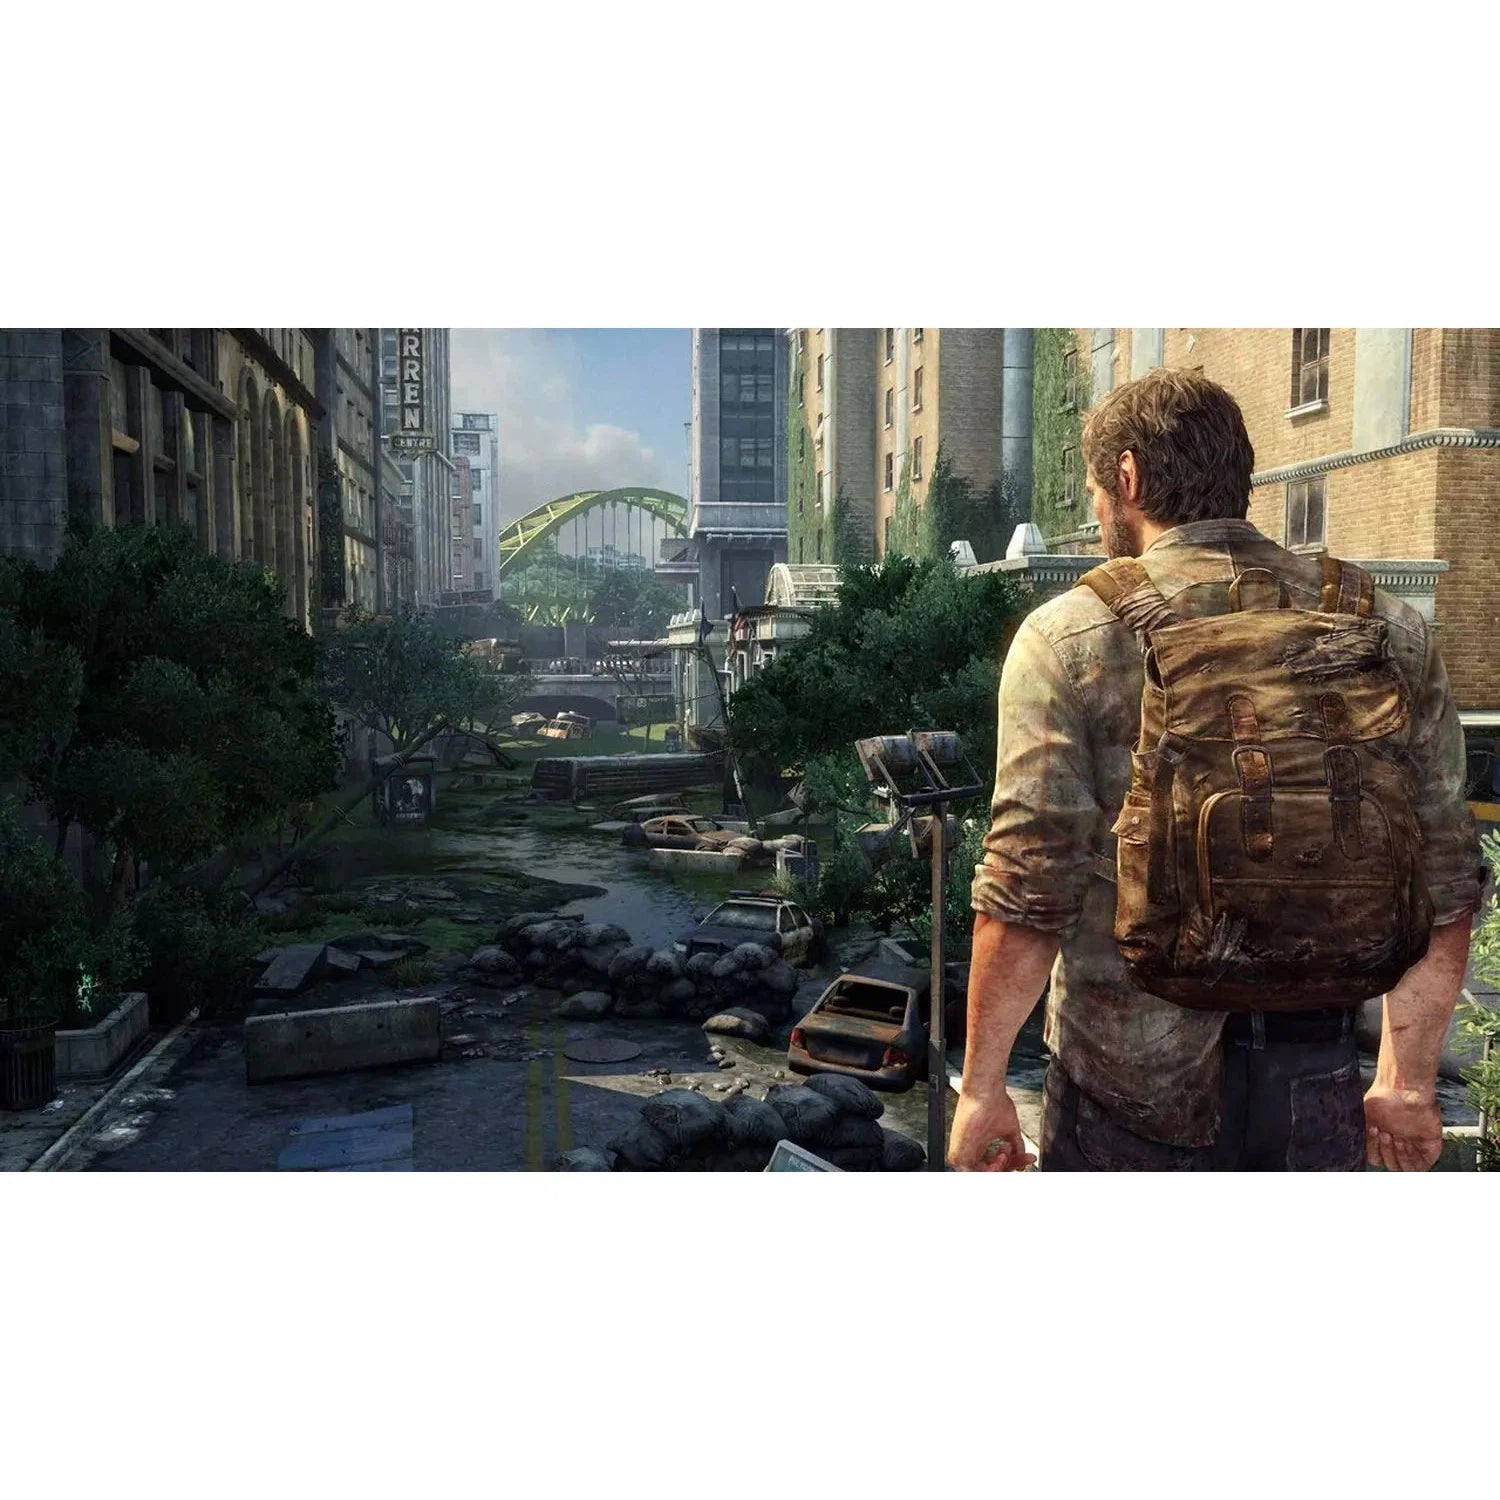 The Last of Us Remastered (PS4)